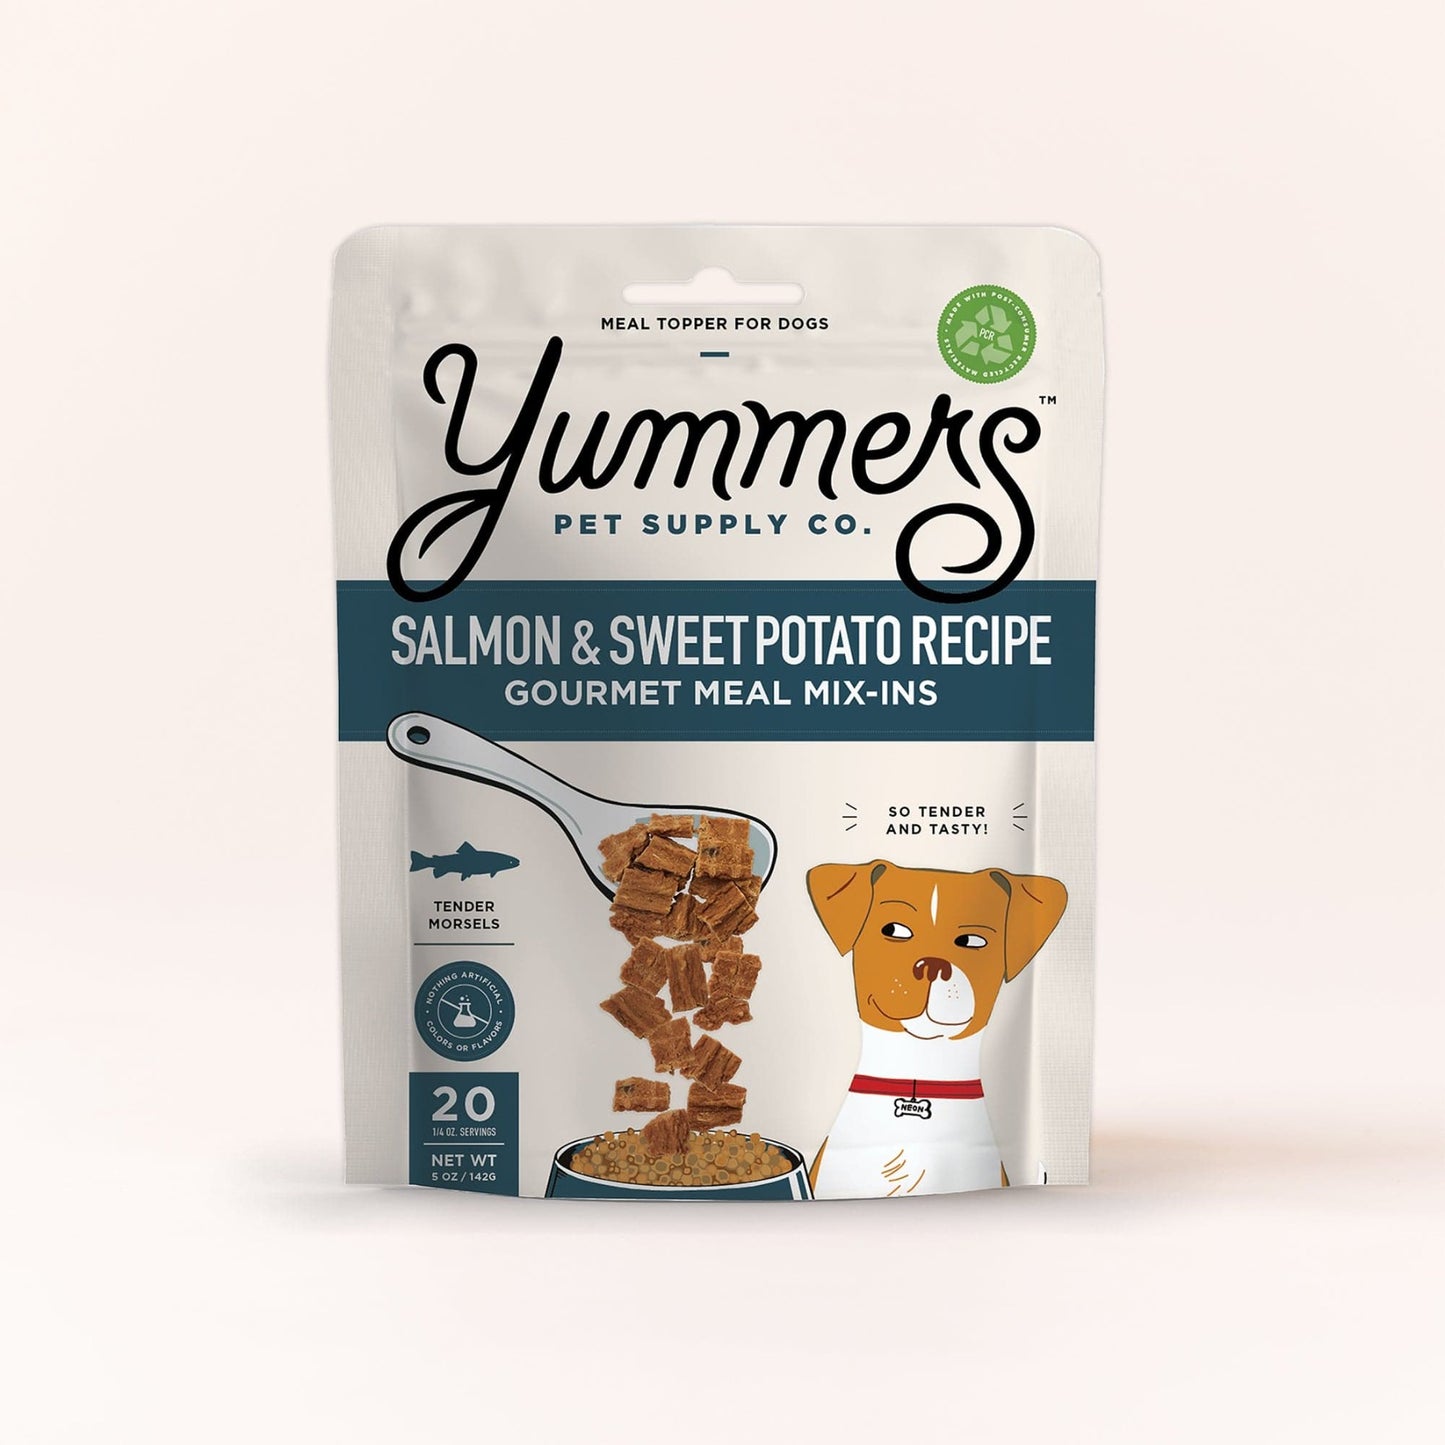 Salmon & Sweet Potato Recipe Gourmet Meal Mix-in for Dogs - front